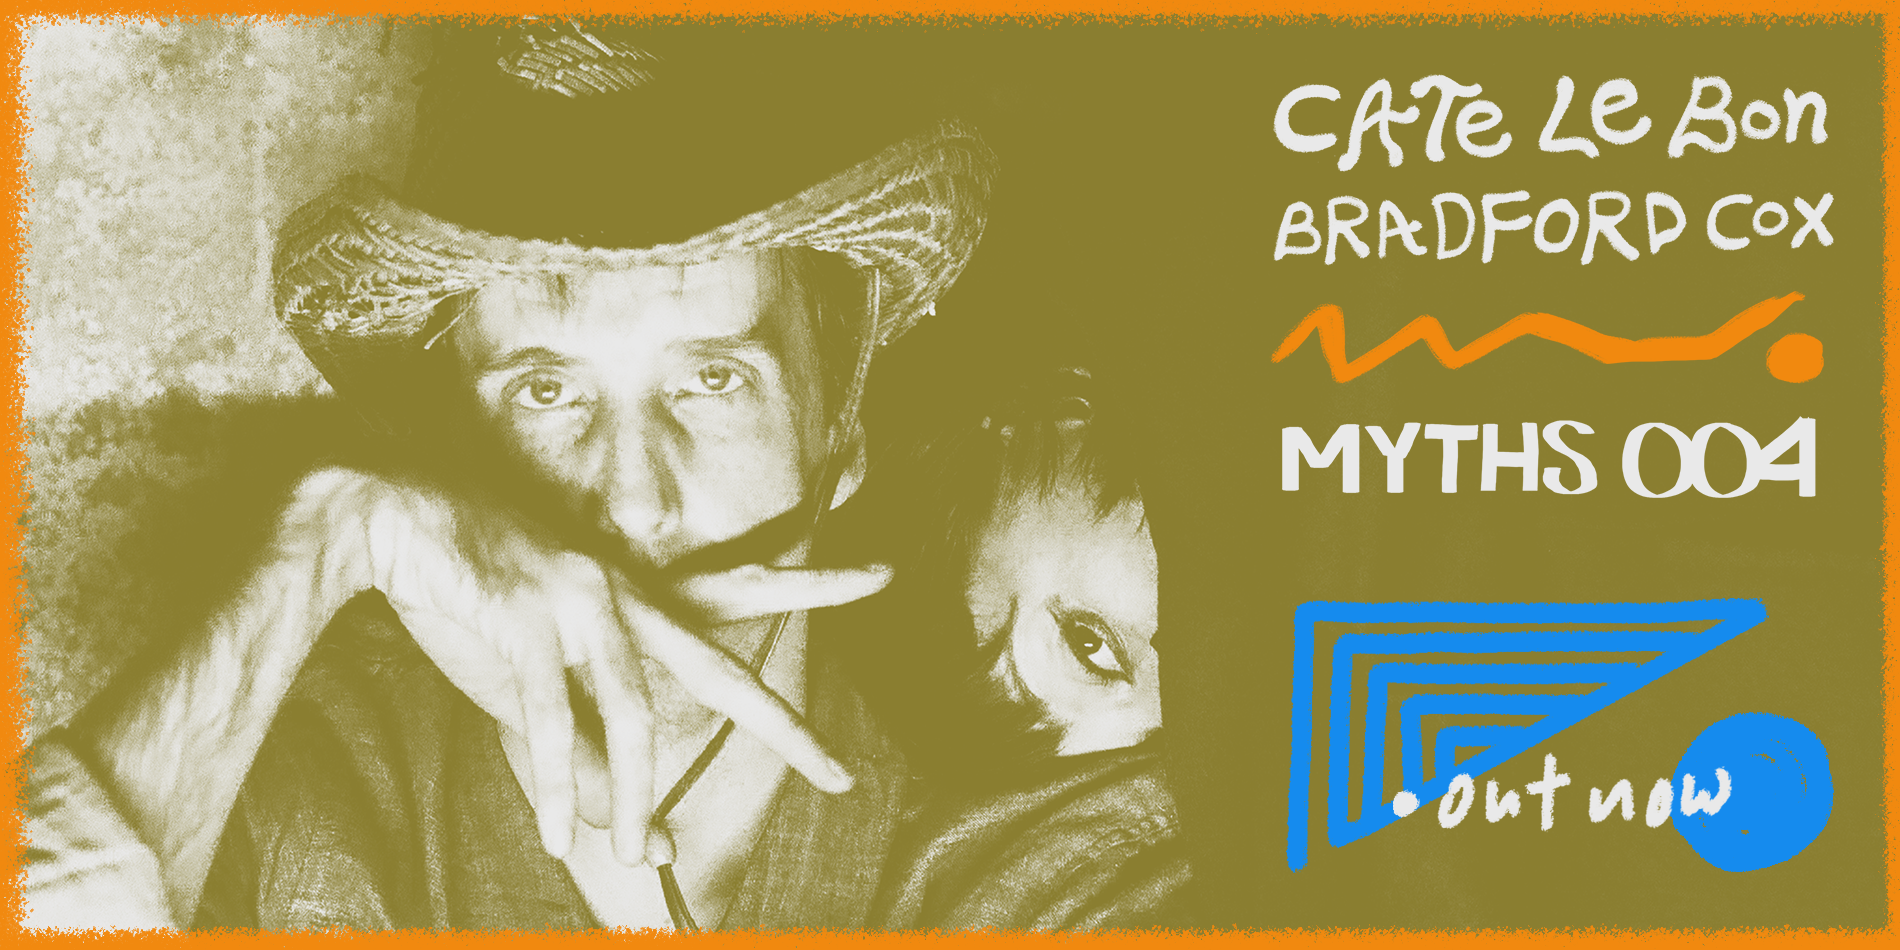 Cate Le Bon and Bradford Cox Myths 004 Out Now Banner